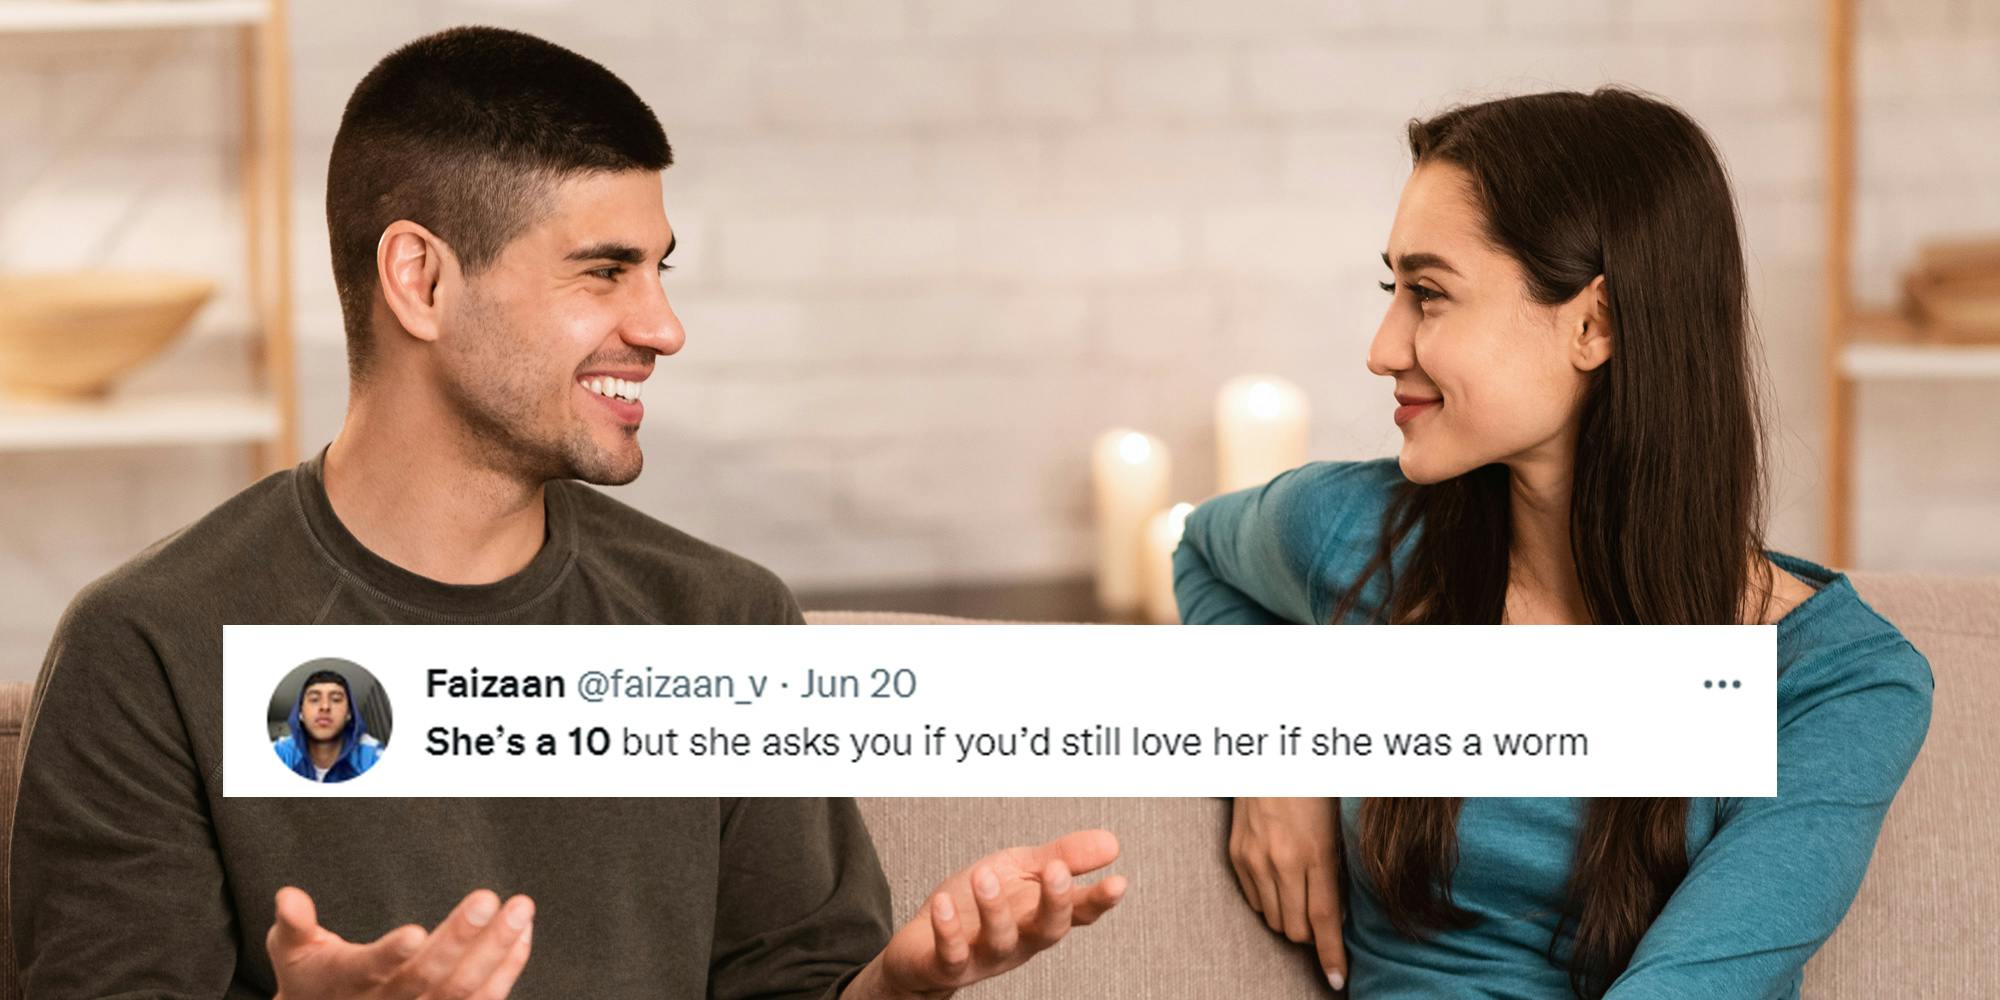 couple sitting on couch man laughing hands out woman smiling with tweet by Faizaan centered caption 'She's a 10 but she asks if you'd still love her if she was a worm'